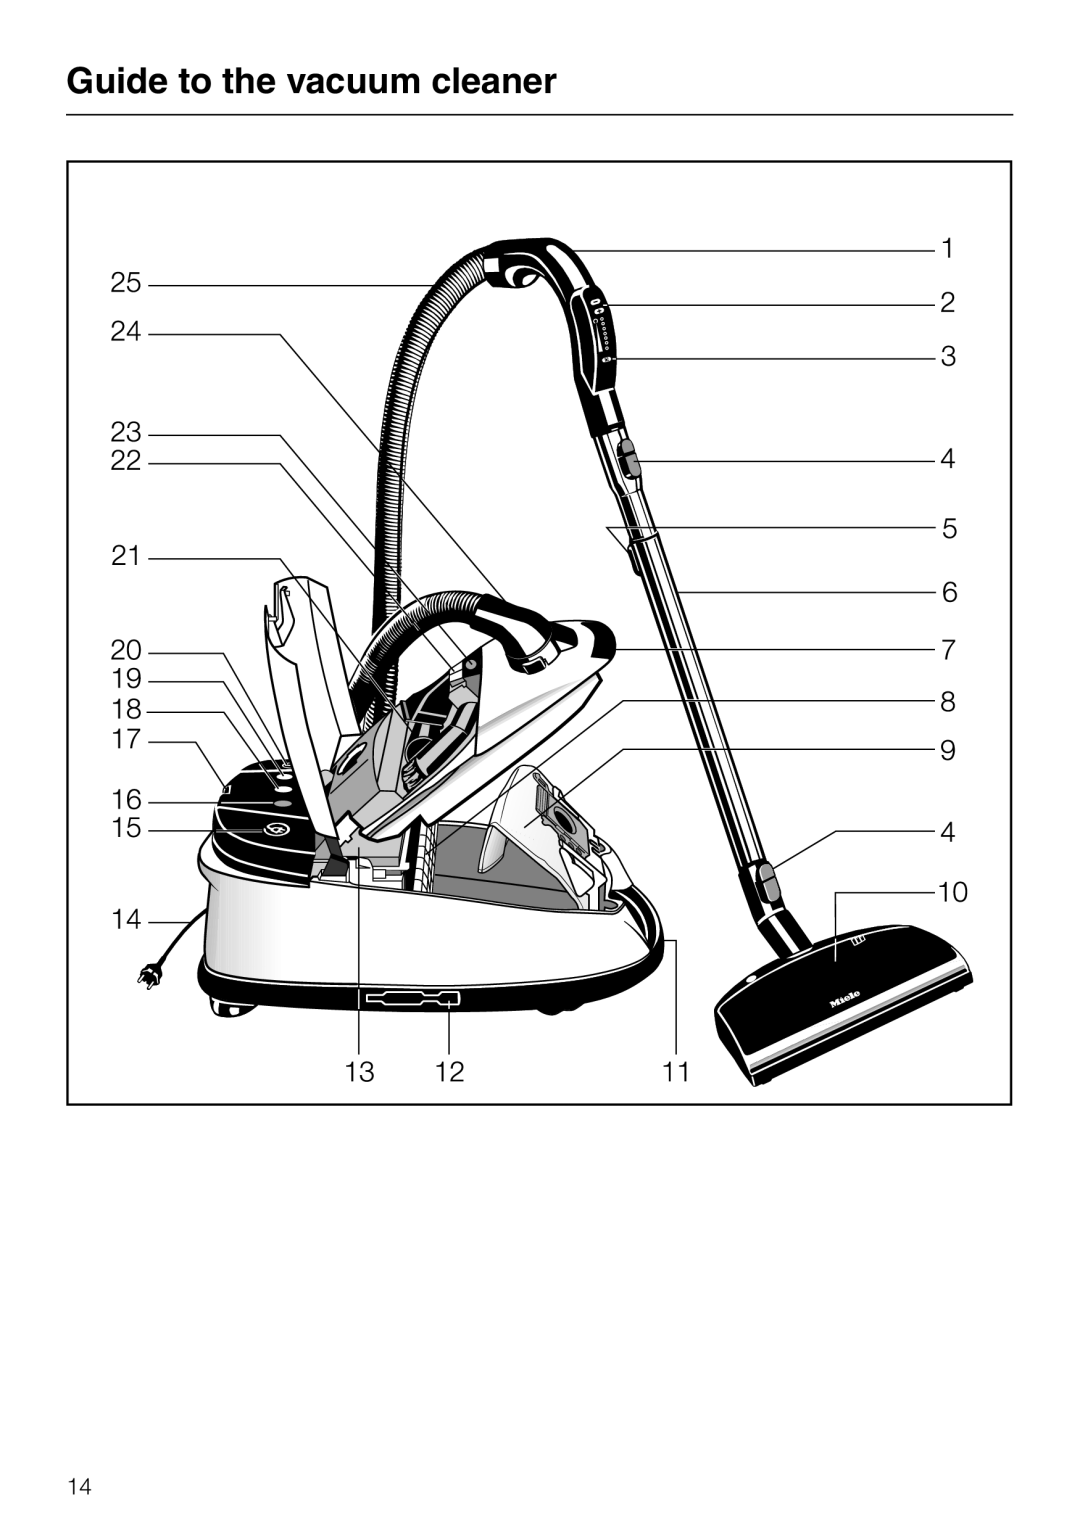 Miele S 558 manual Guide to the vacuum cleaner 